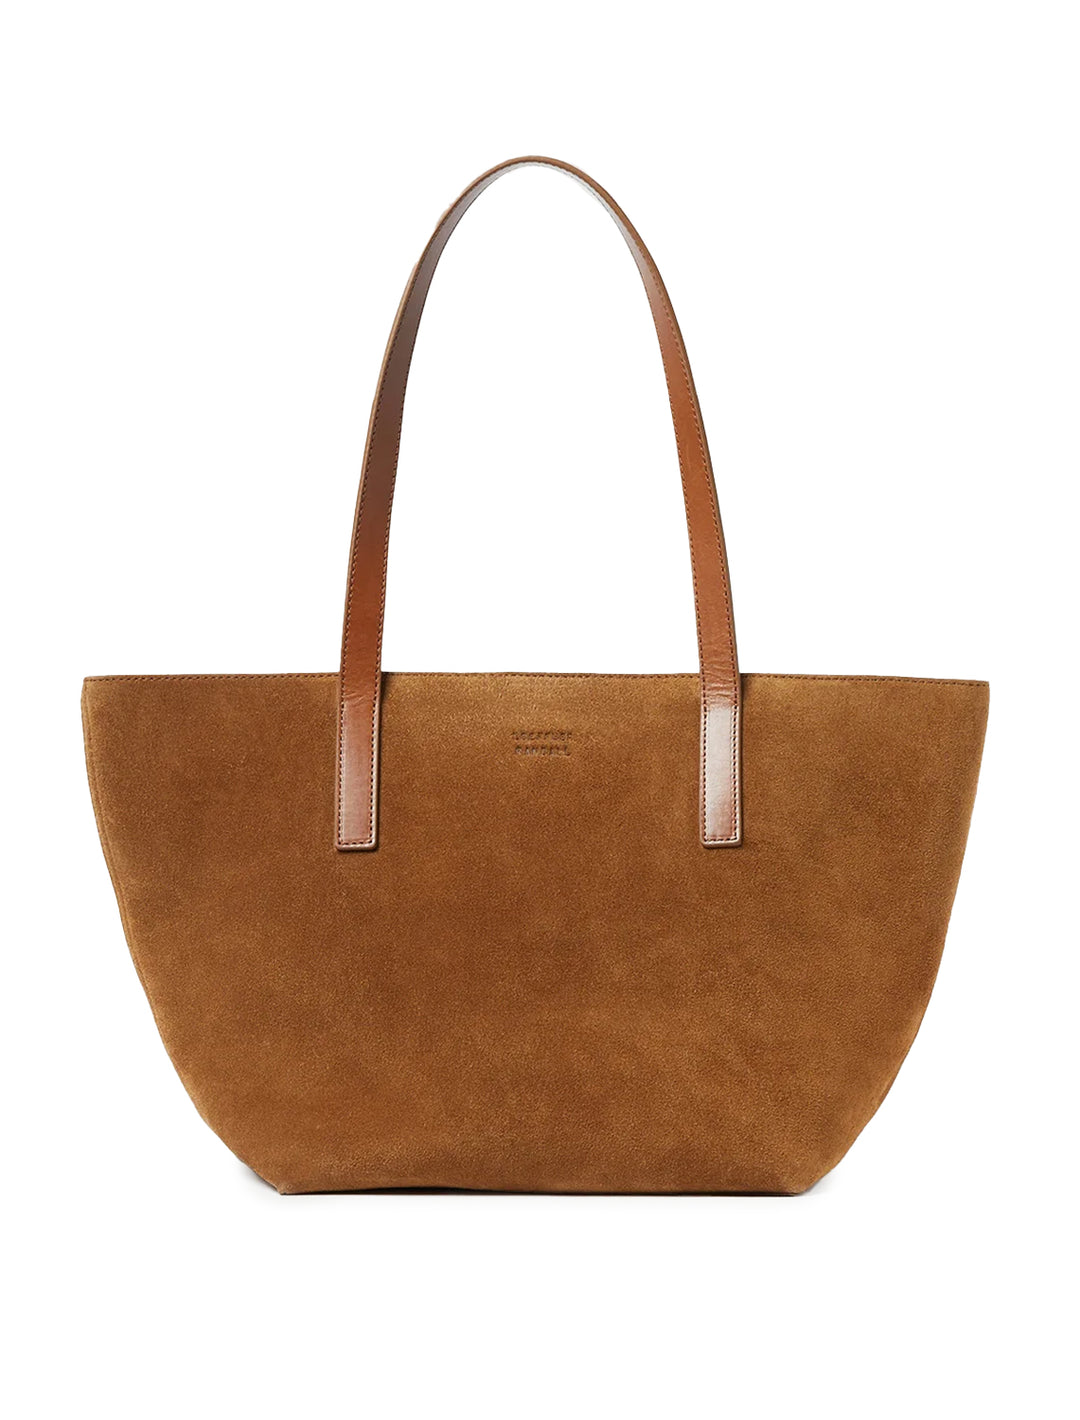 Front view of Loeffler Randall's easton medium tote in cacao.